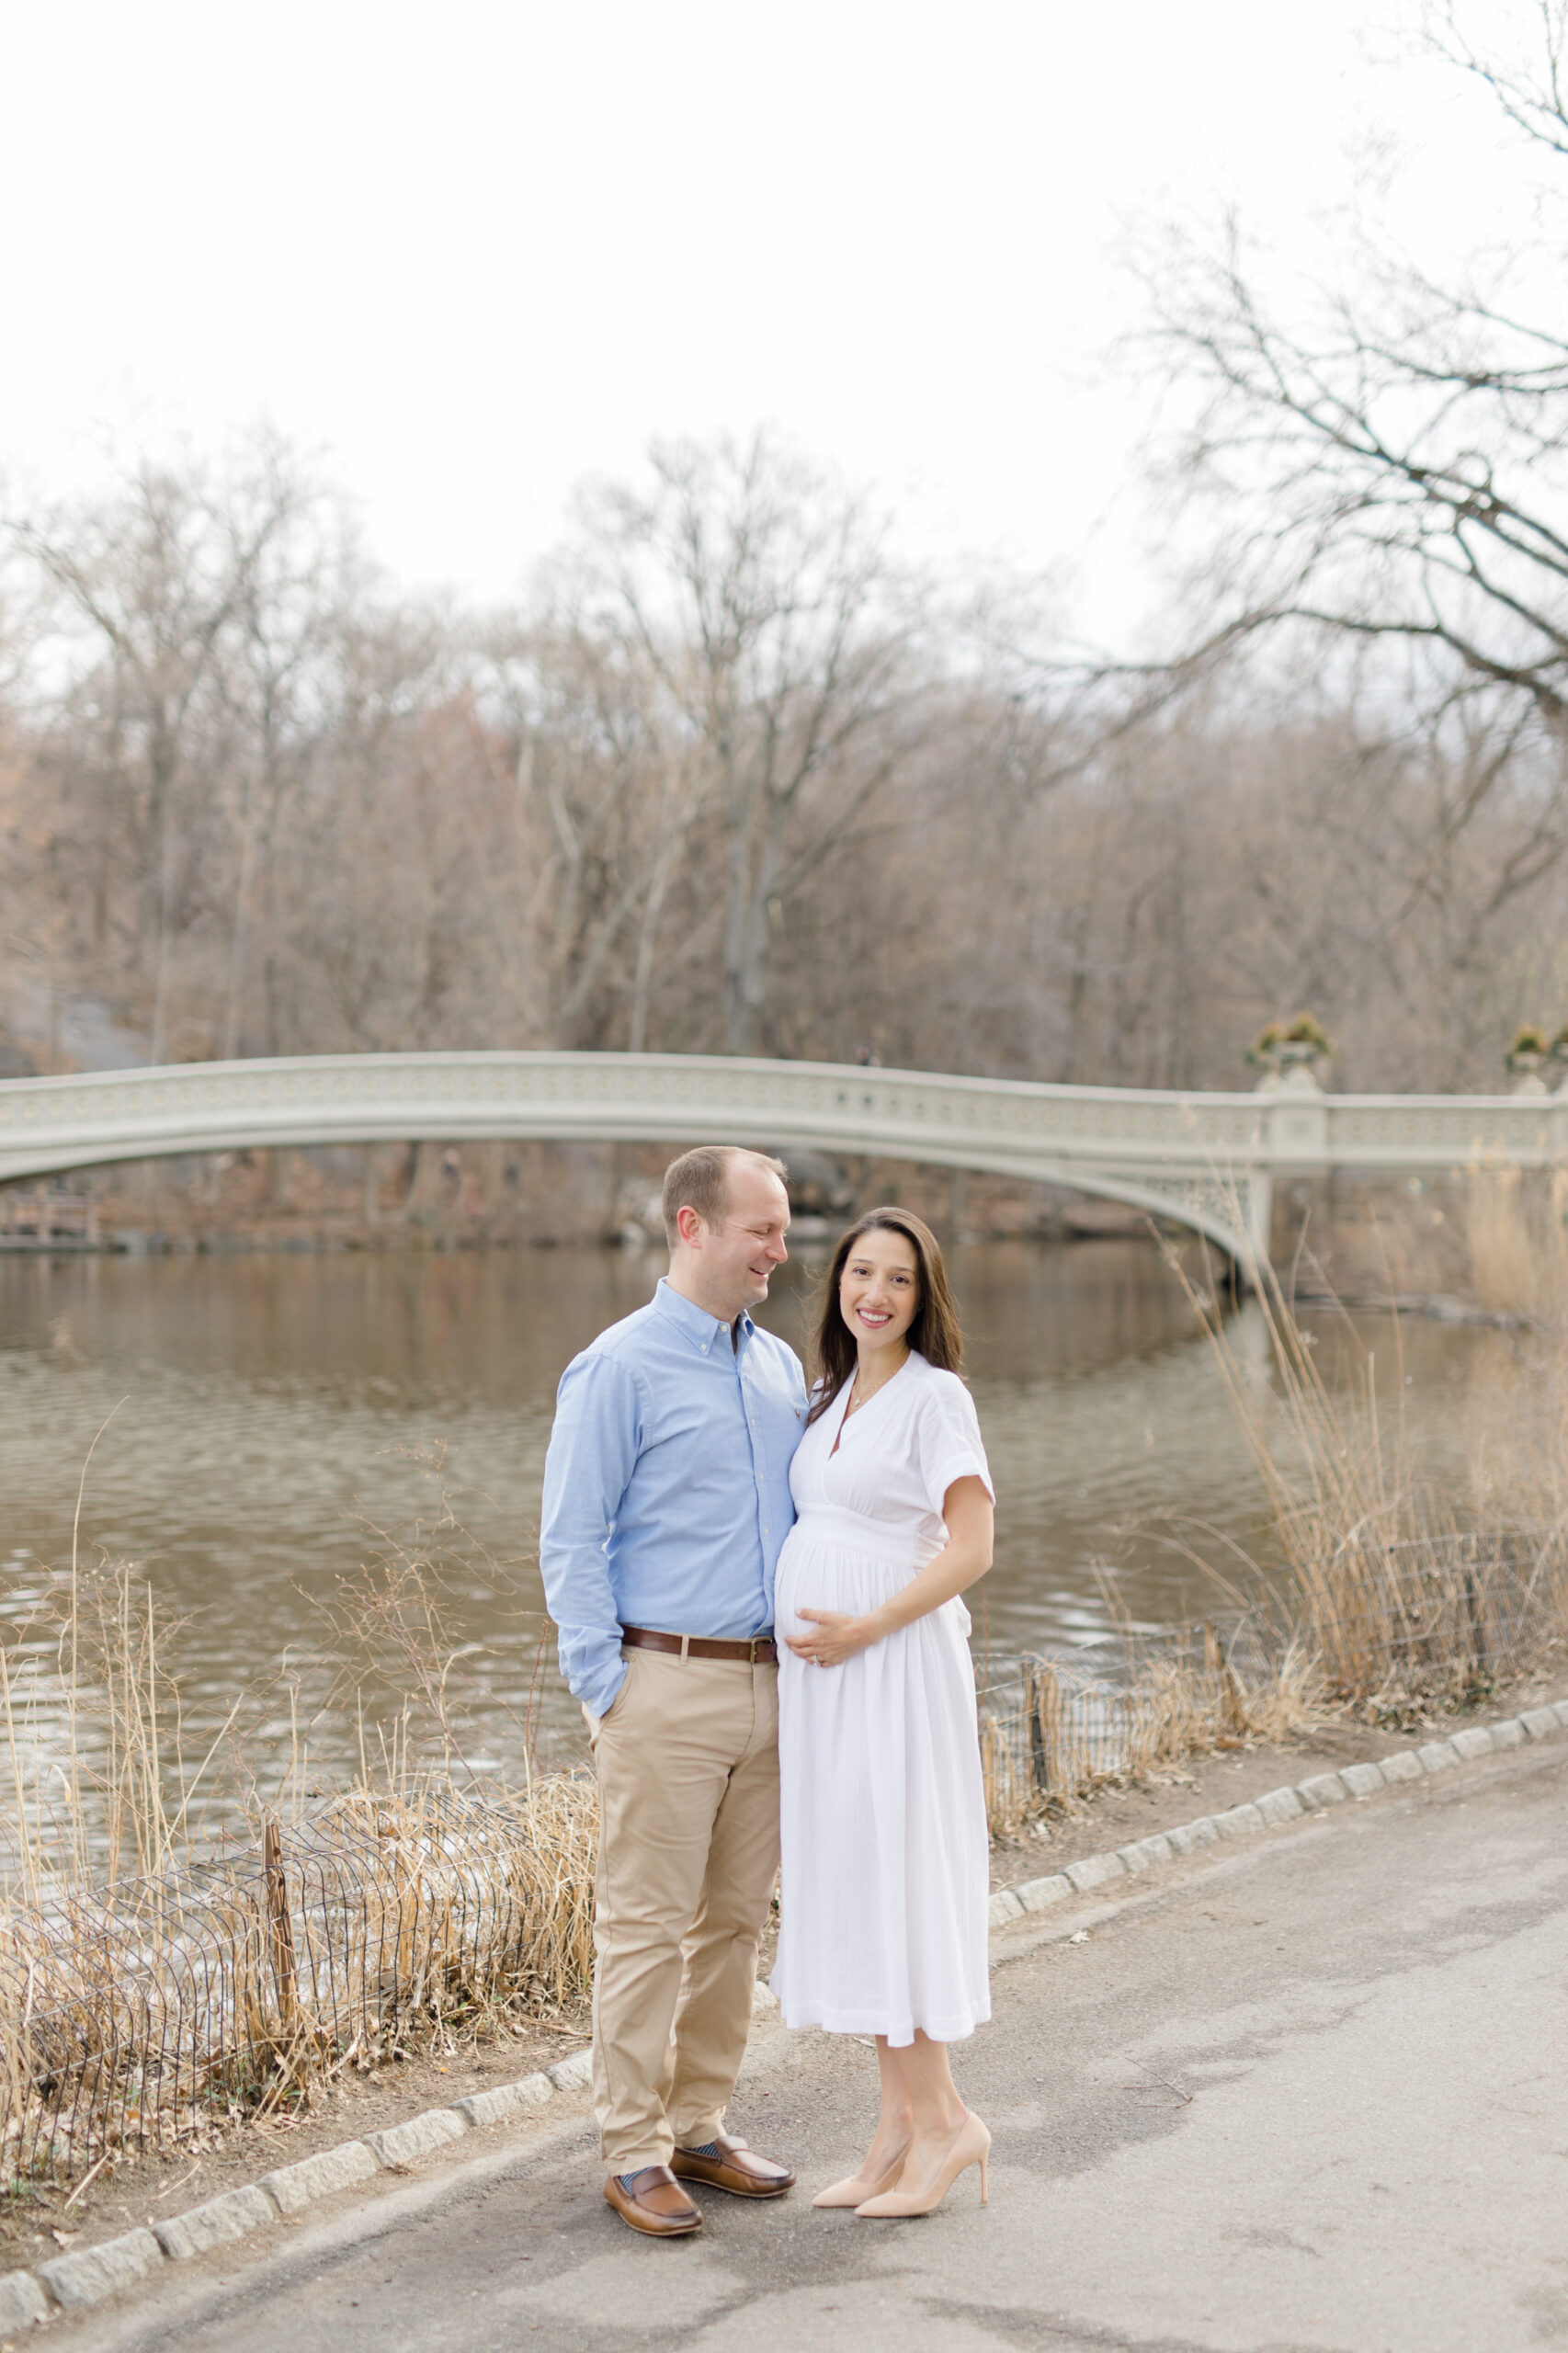 An expecting couple in front of ow Bridge in Central Park during a New York City maternity photography session with Jacqueline Clair Photography